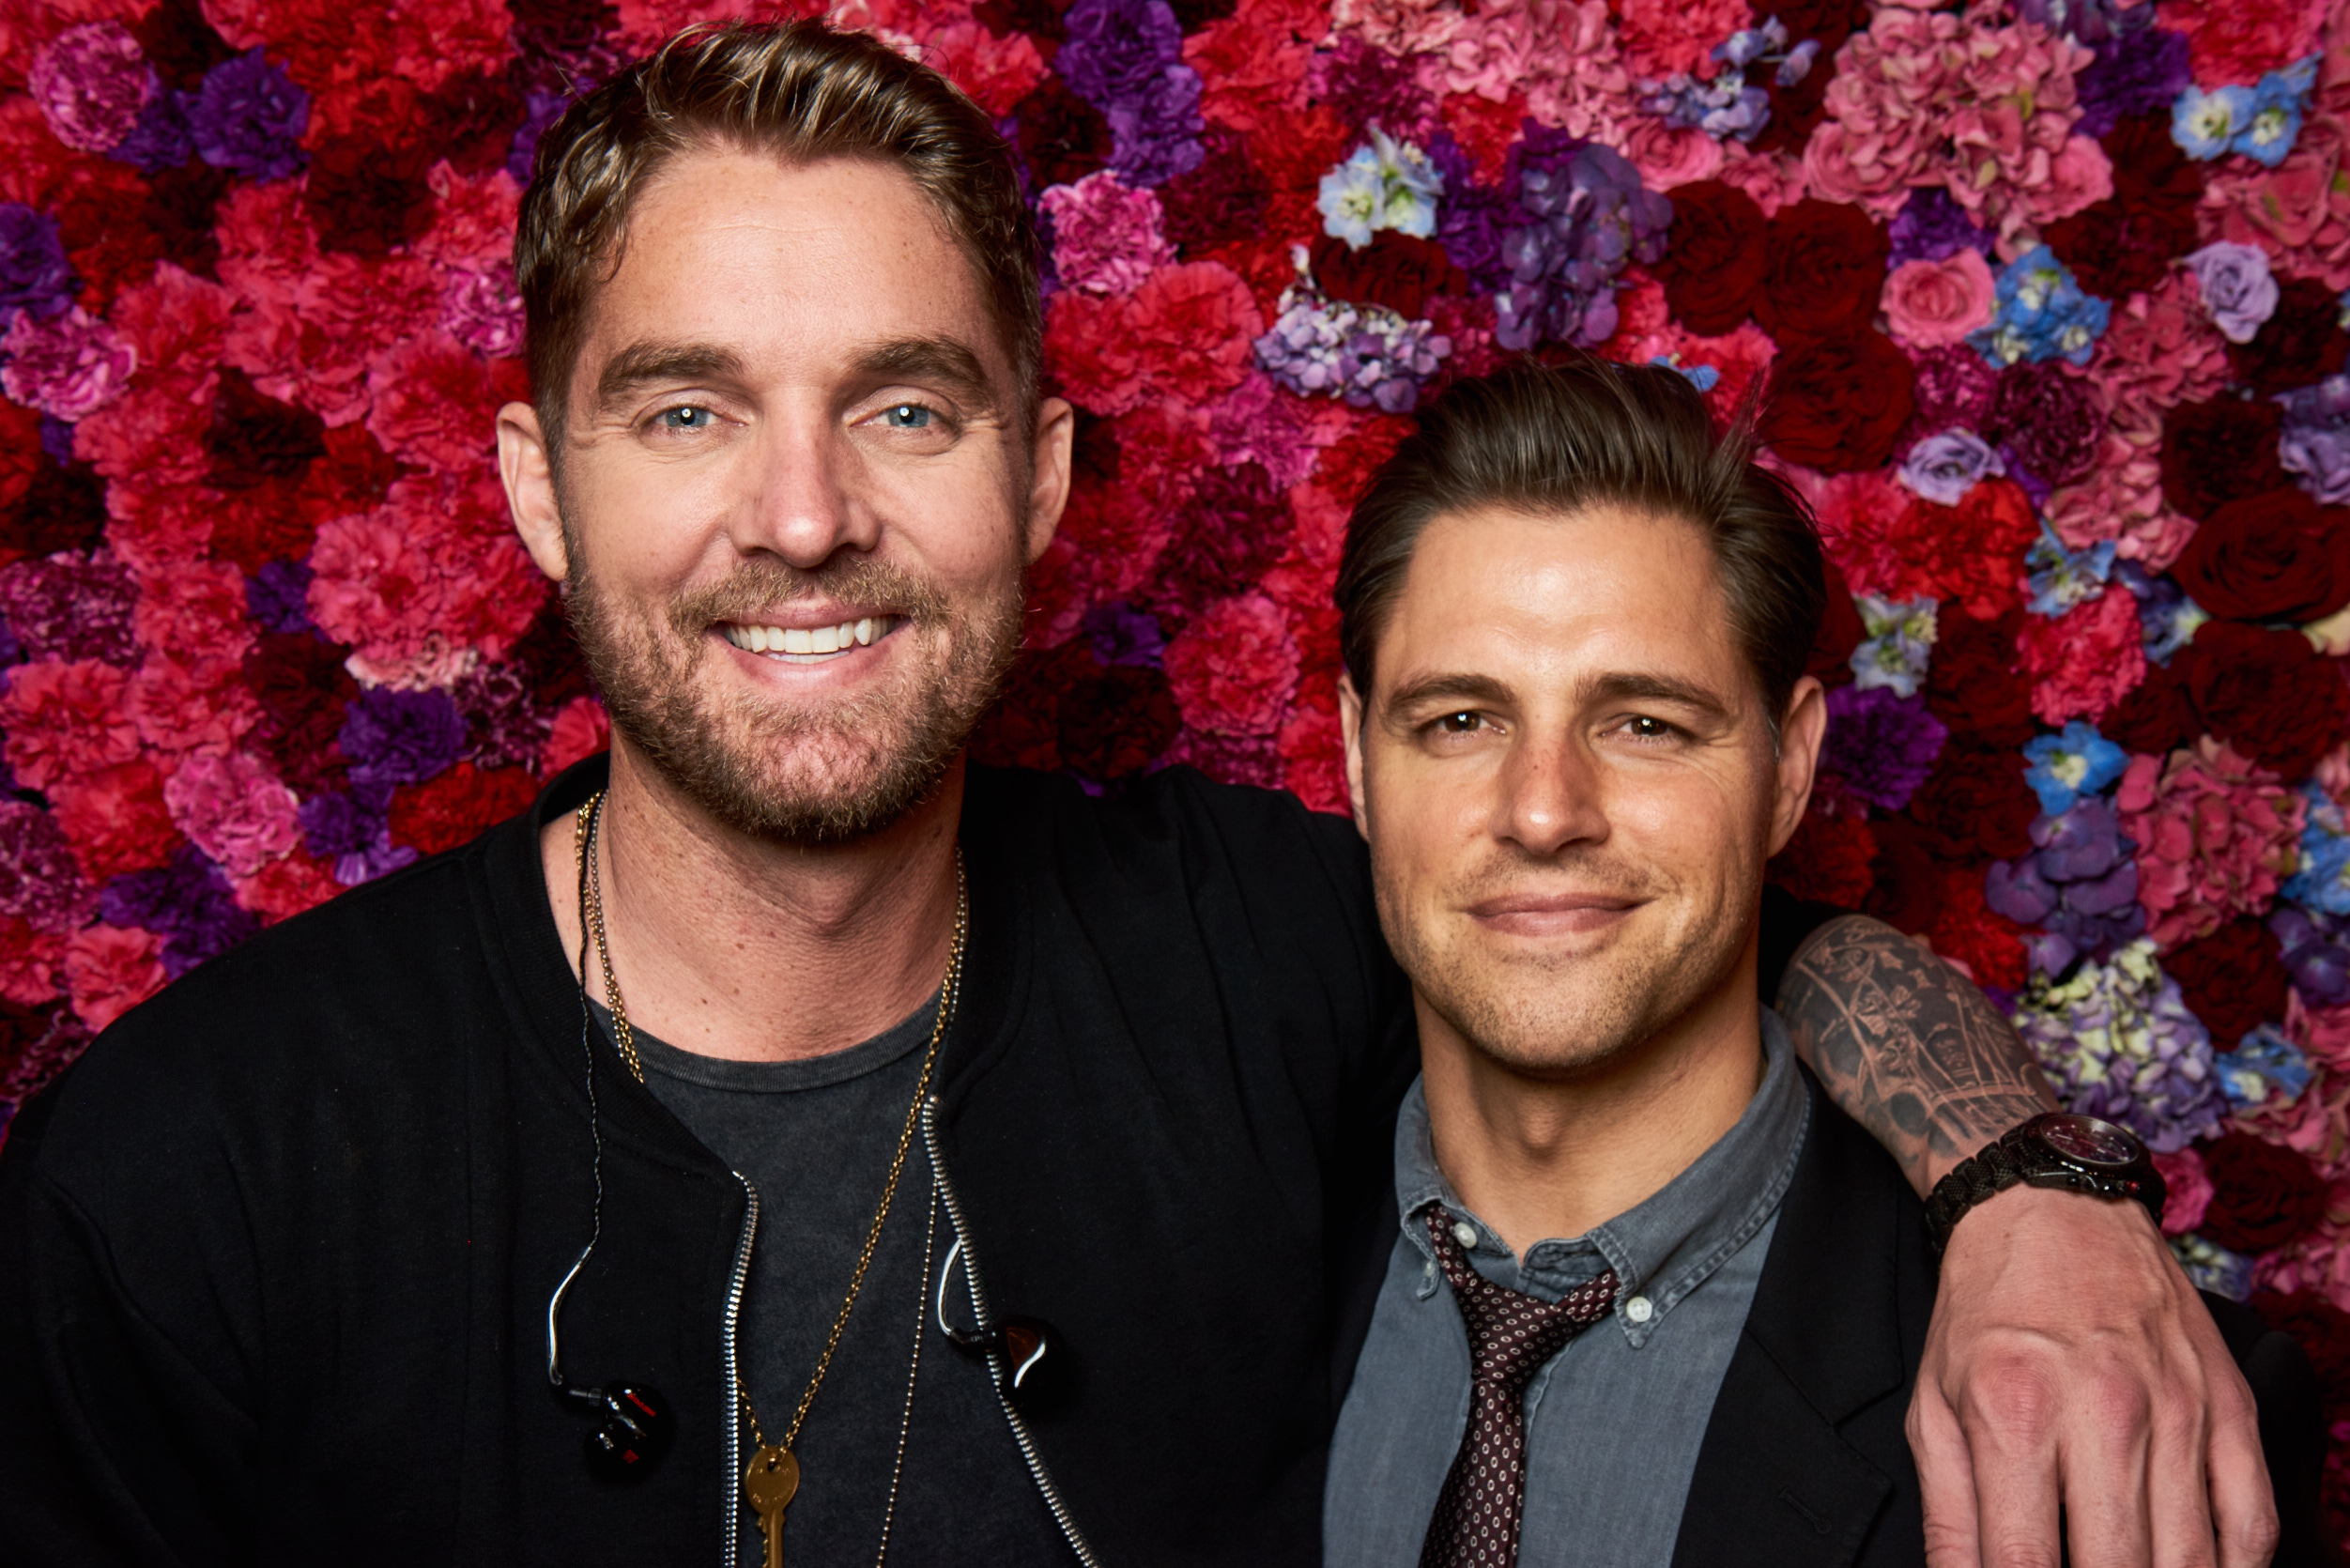 GALLERY: Brett Young and Sam Page Countdown to Valentine’s Day in Snowy New York